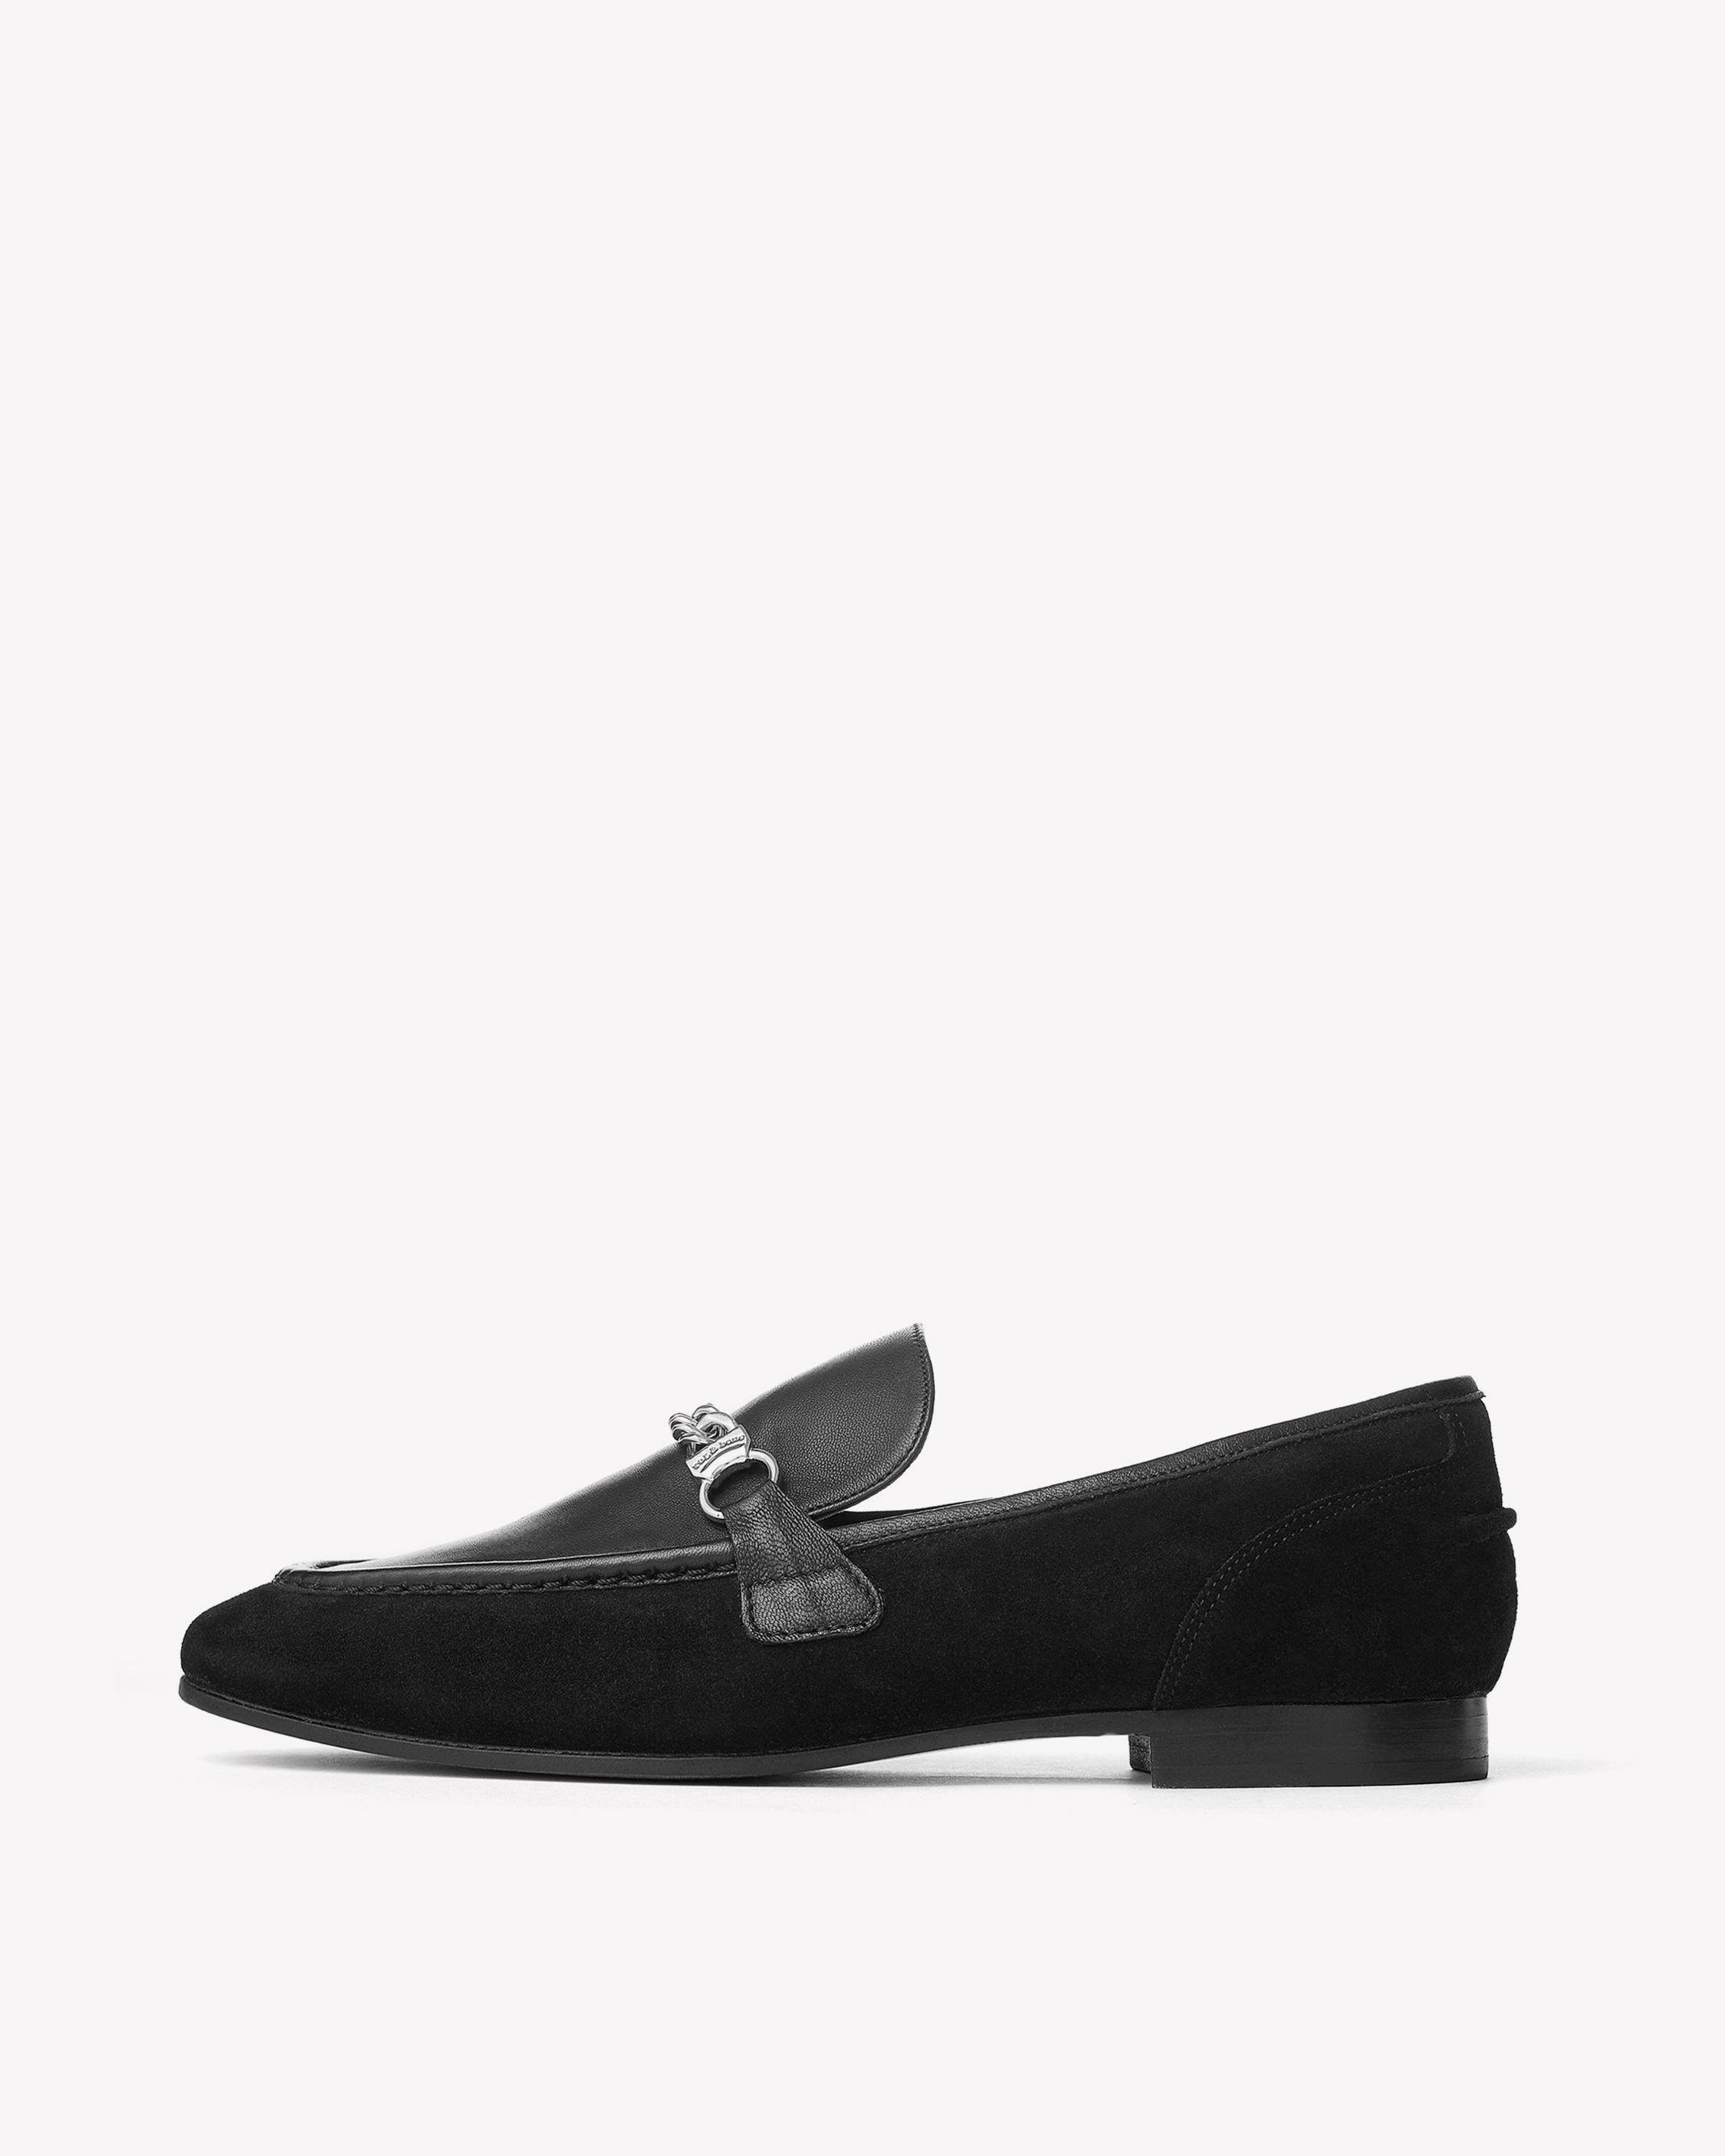 Womens Shoes: Boots to Loafers to Sandals with an Urban Edge | rag & bone